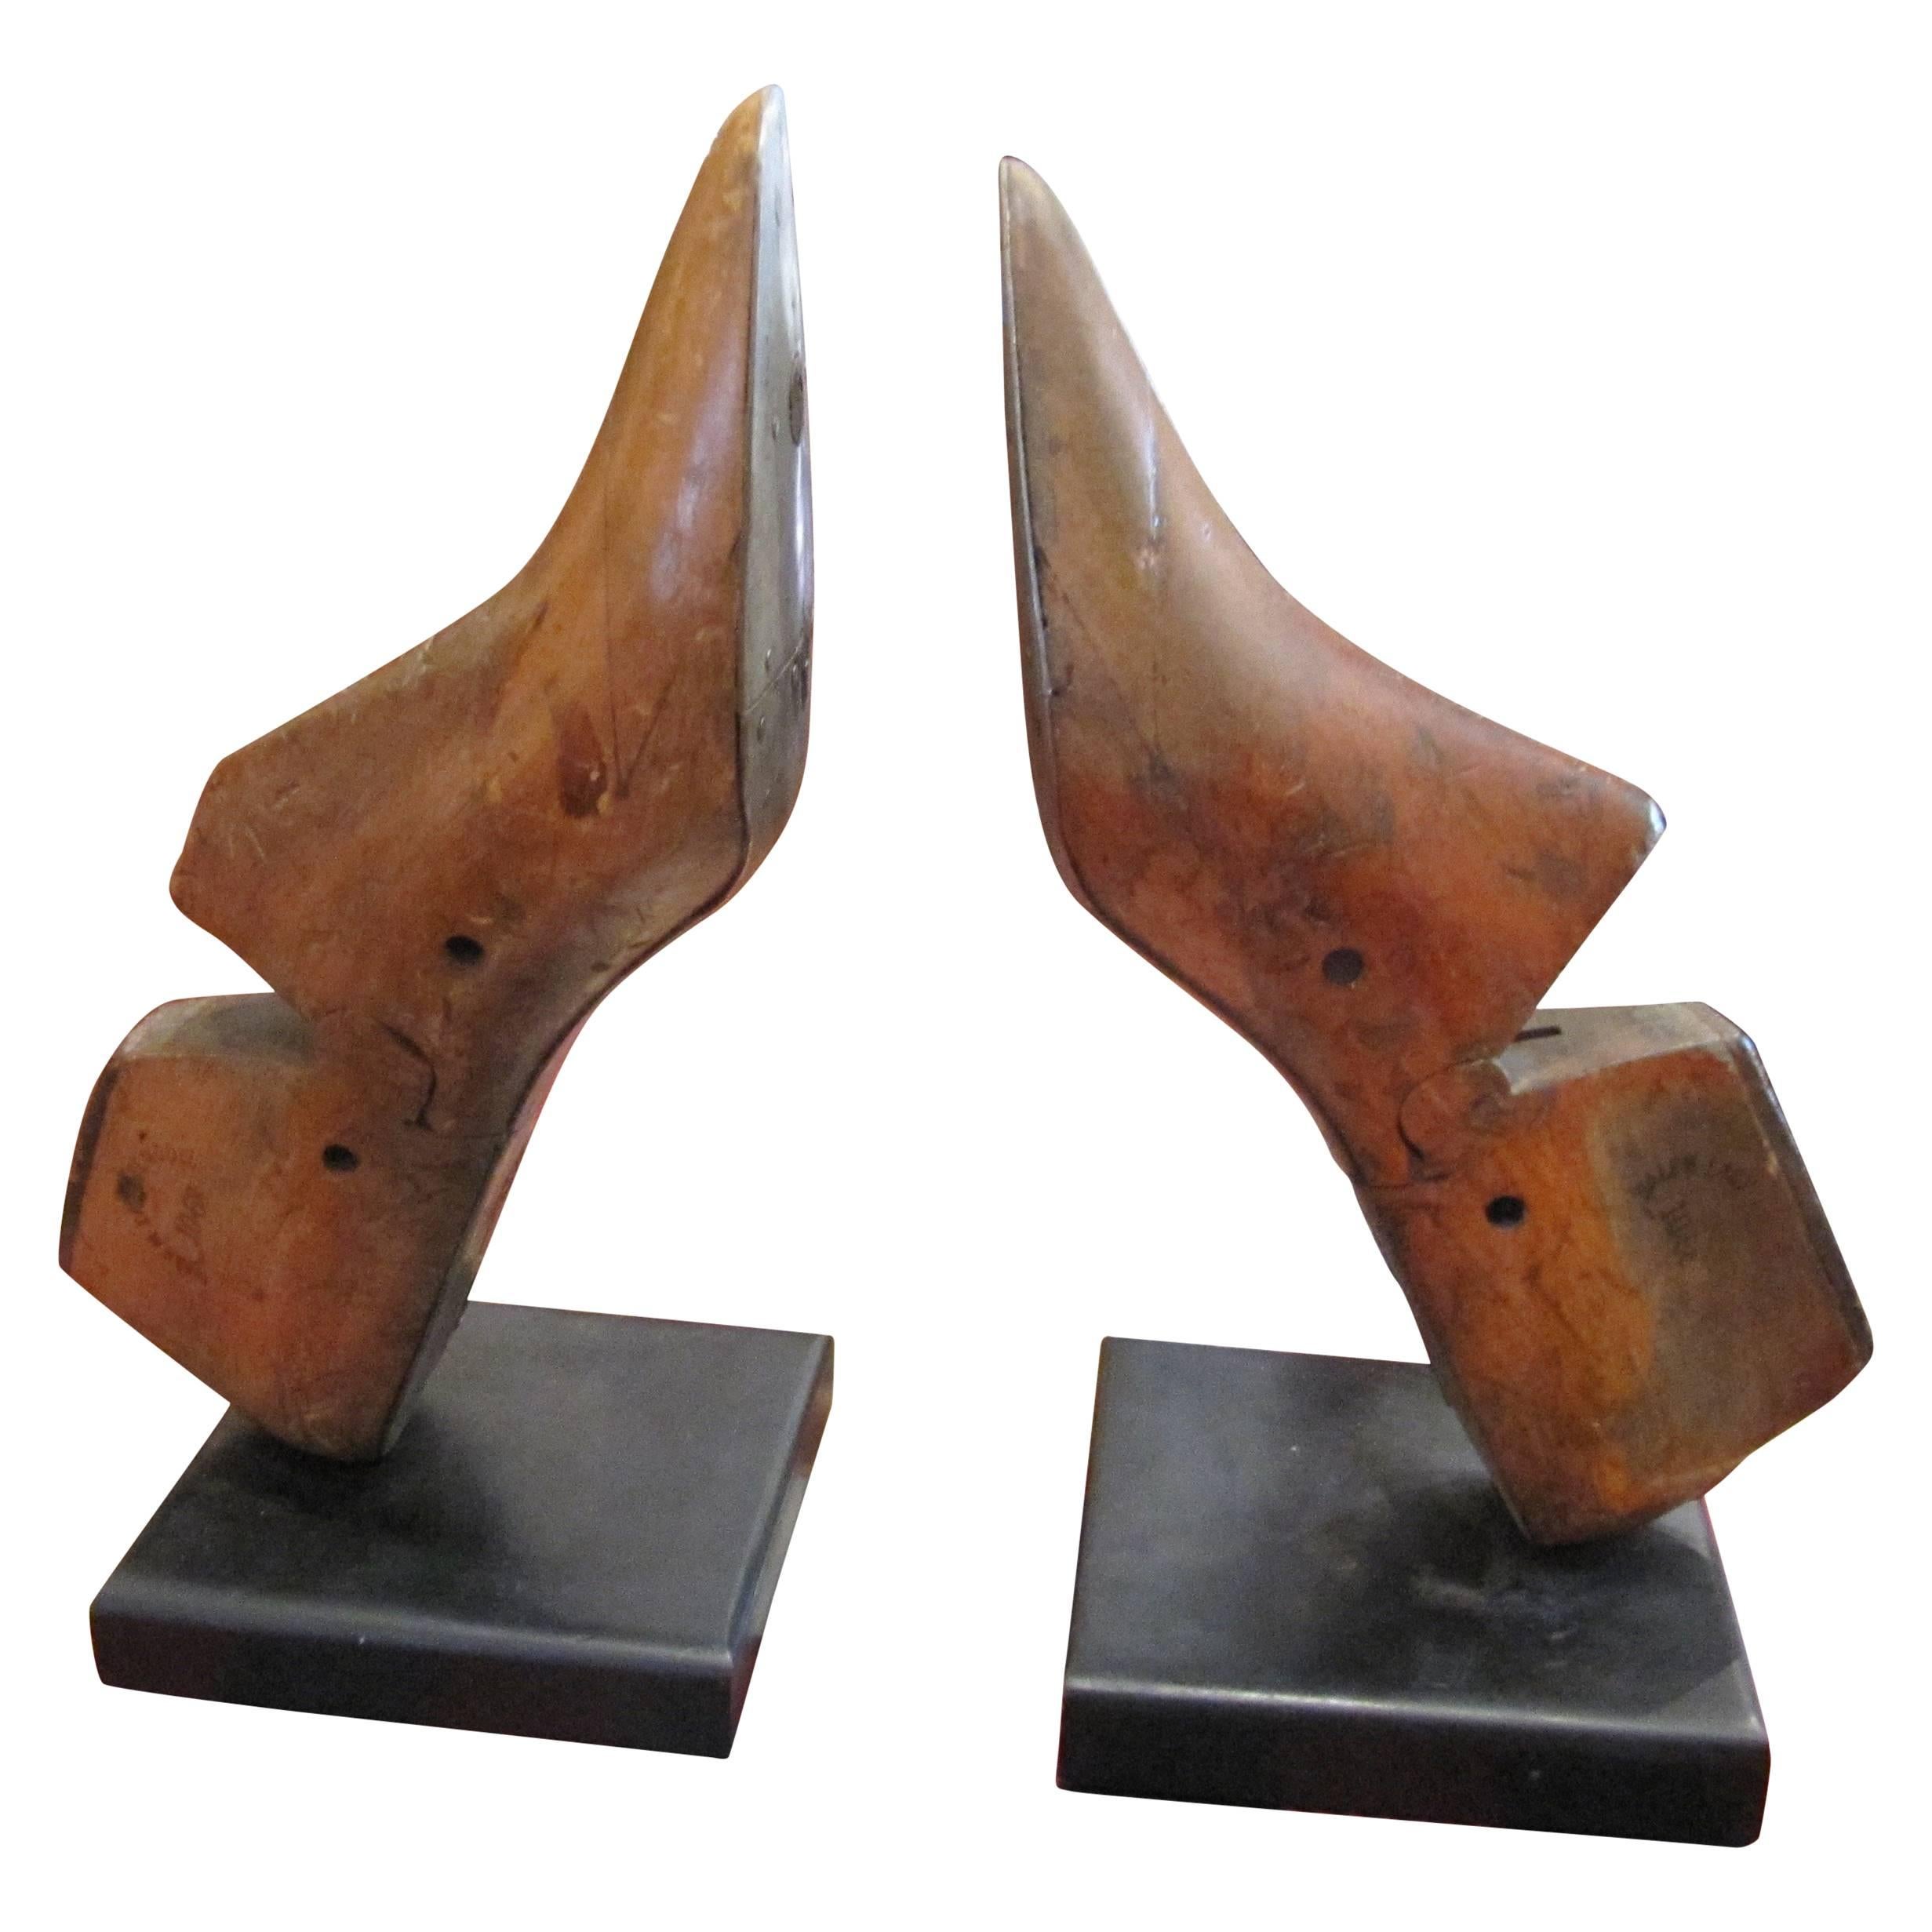 One Pair of Charming Wooden Shoe Moulds Mounted as Bookends Great Character.